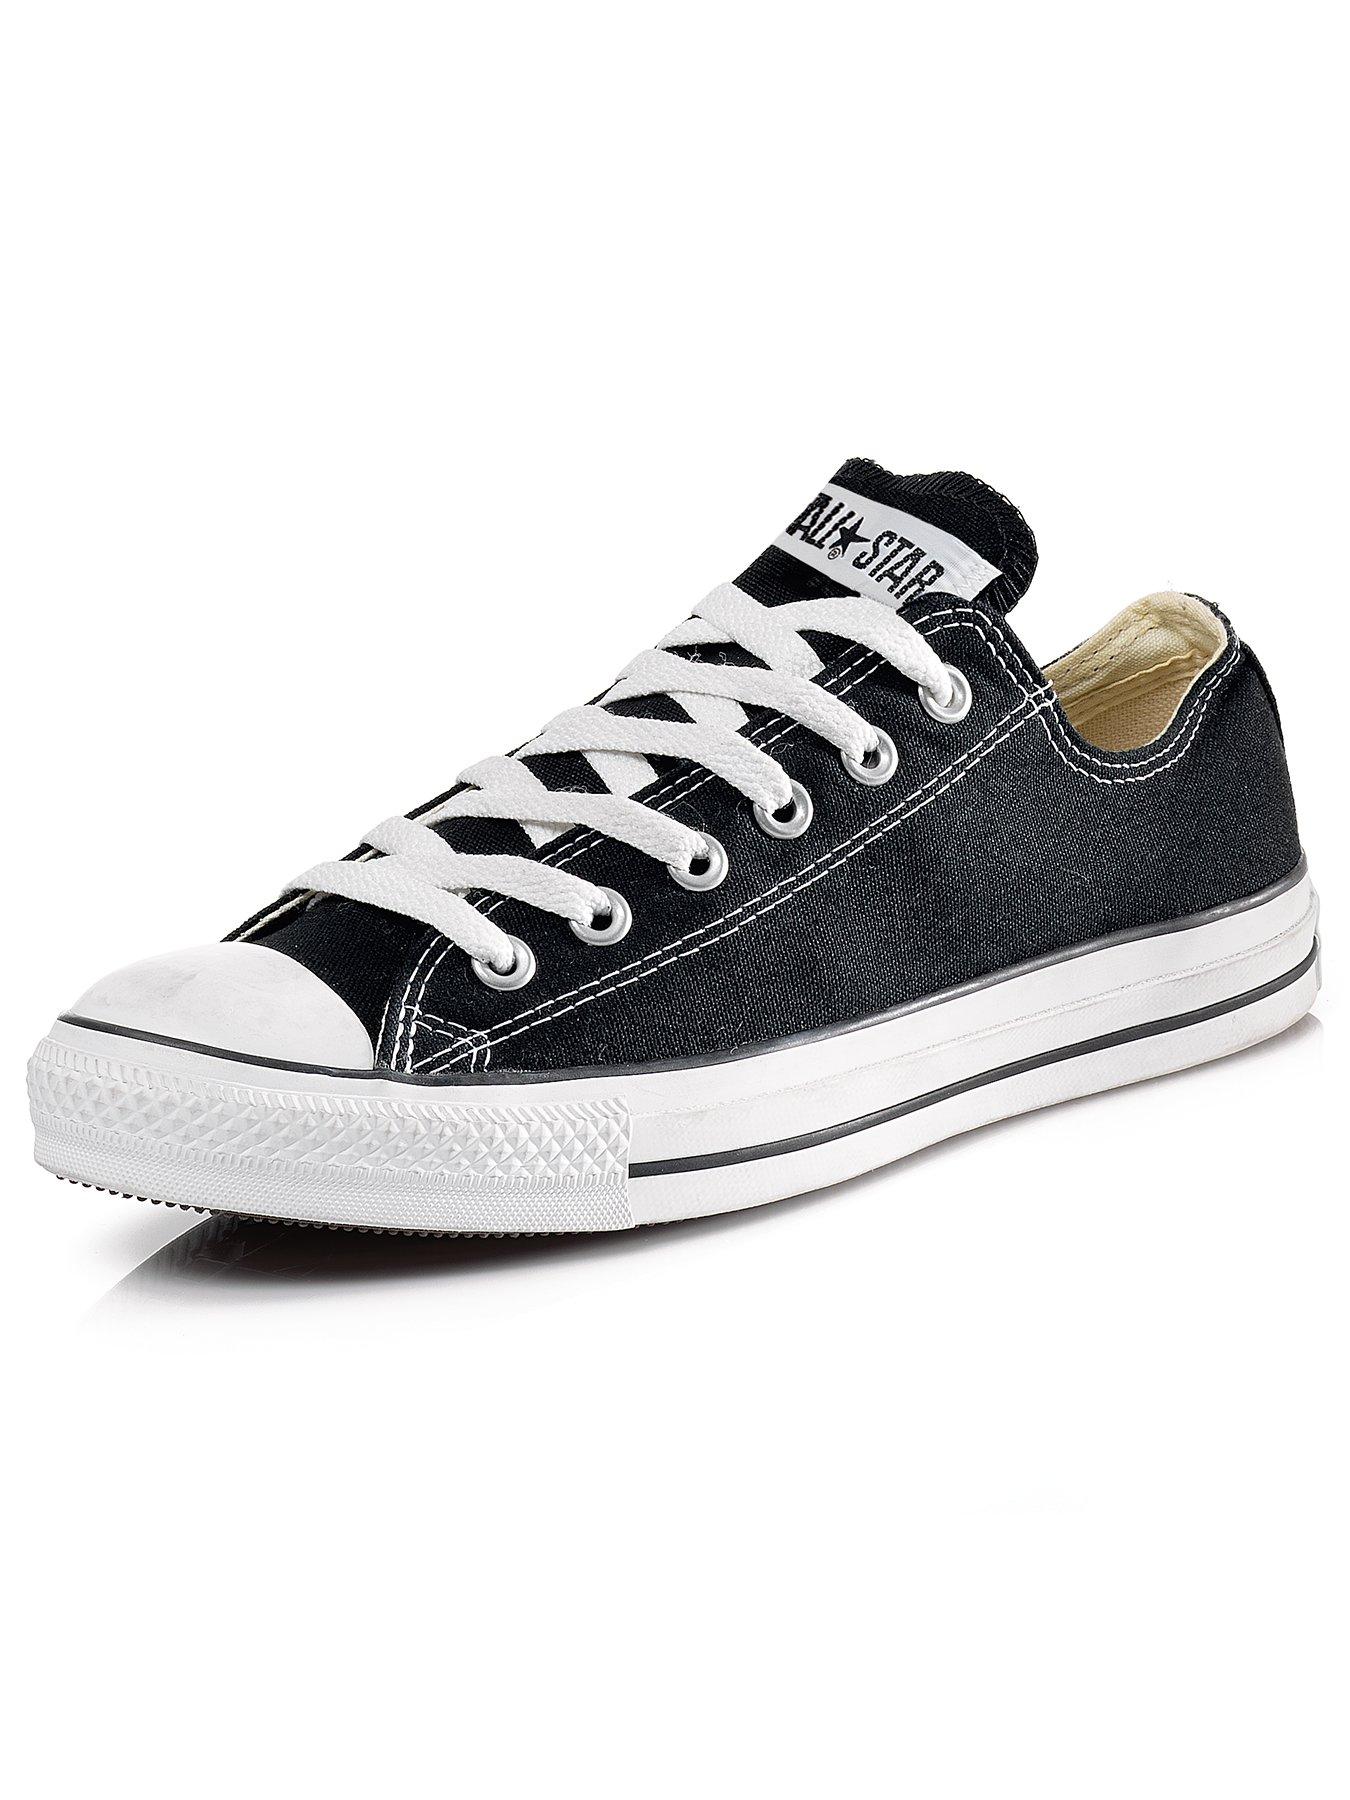 converse chuck taylor all star ox trainers